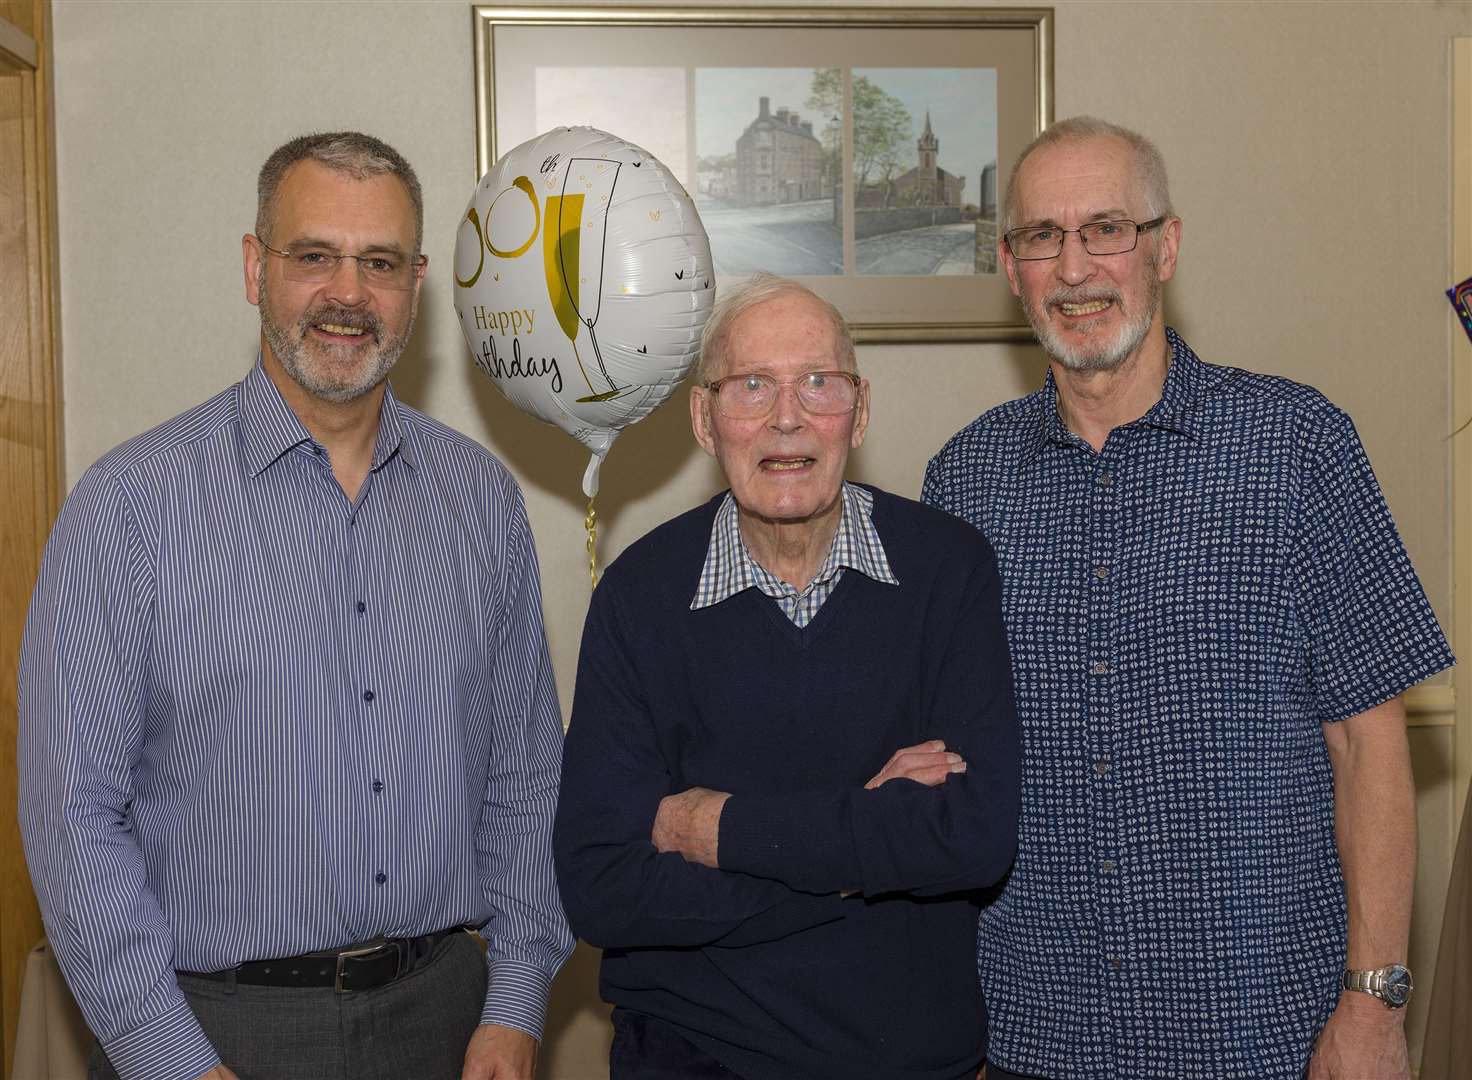 Allan Abernethy pictured with his sons Wilson (left) and Bill on his 100th birthday.